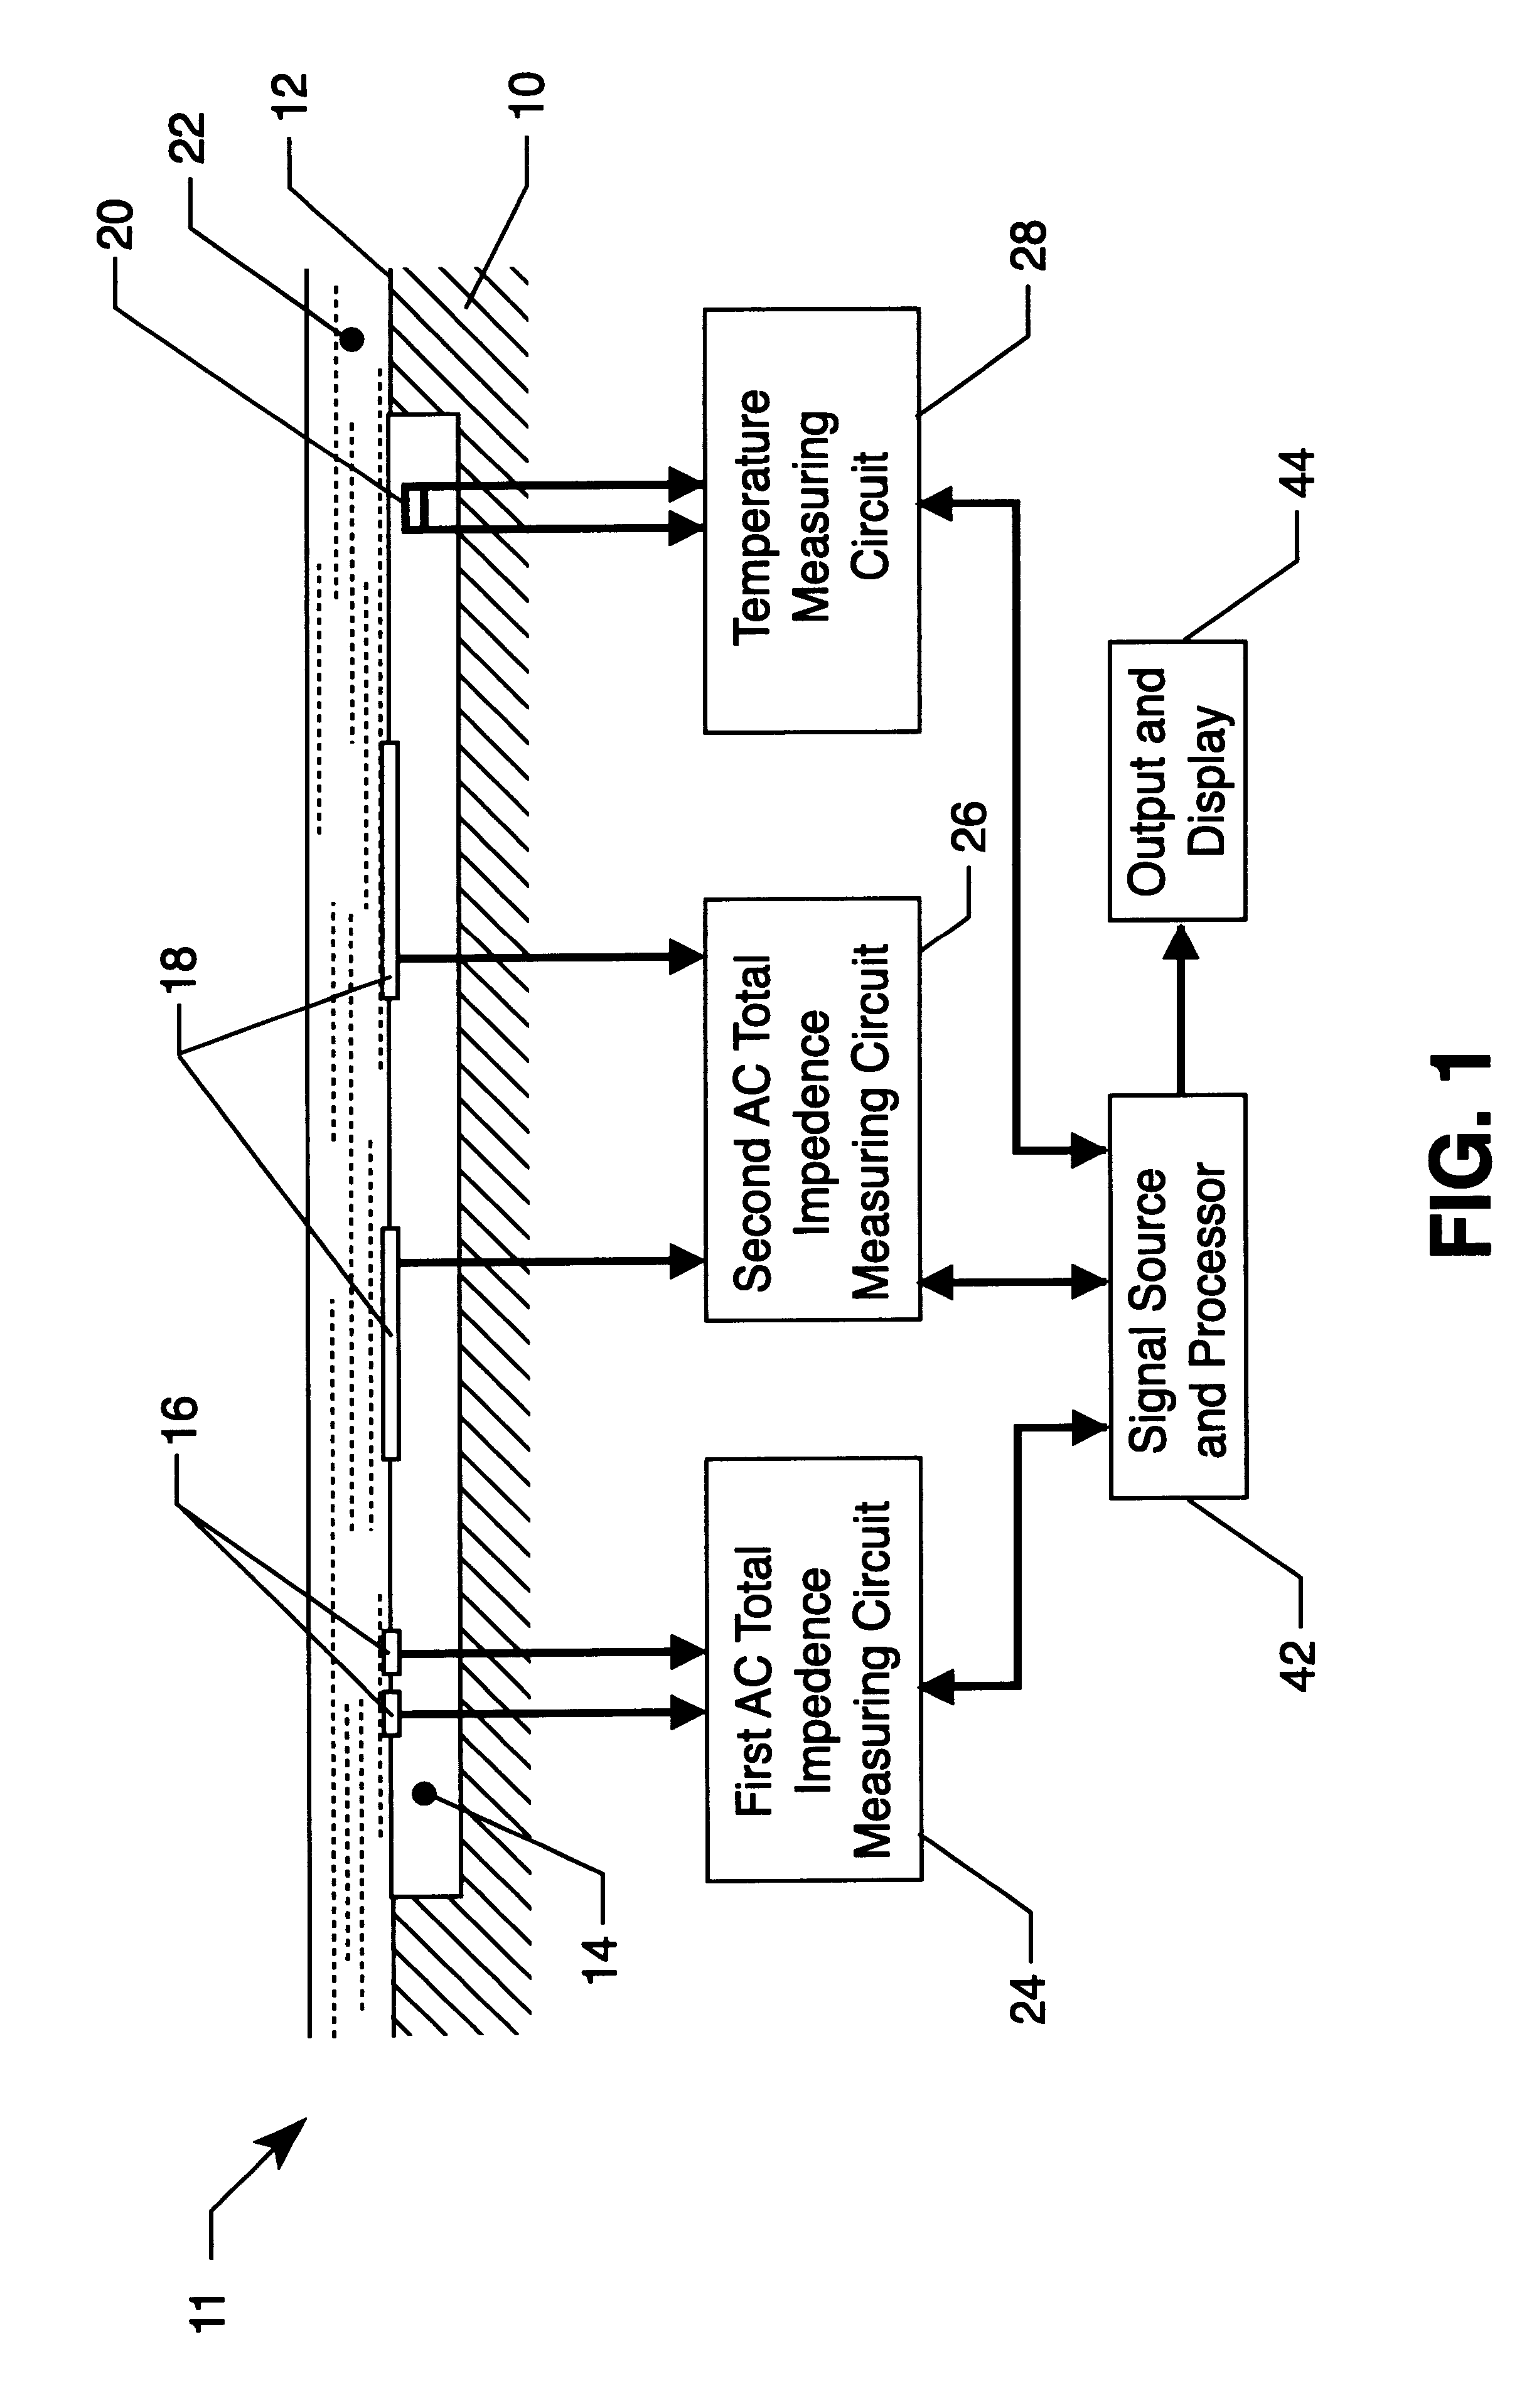 Thickness measurement device for ice, or ice mixed with water or other liquid